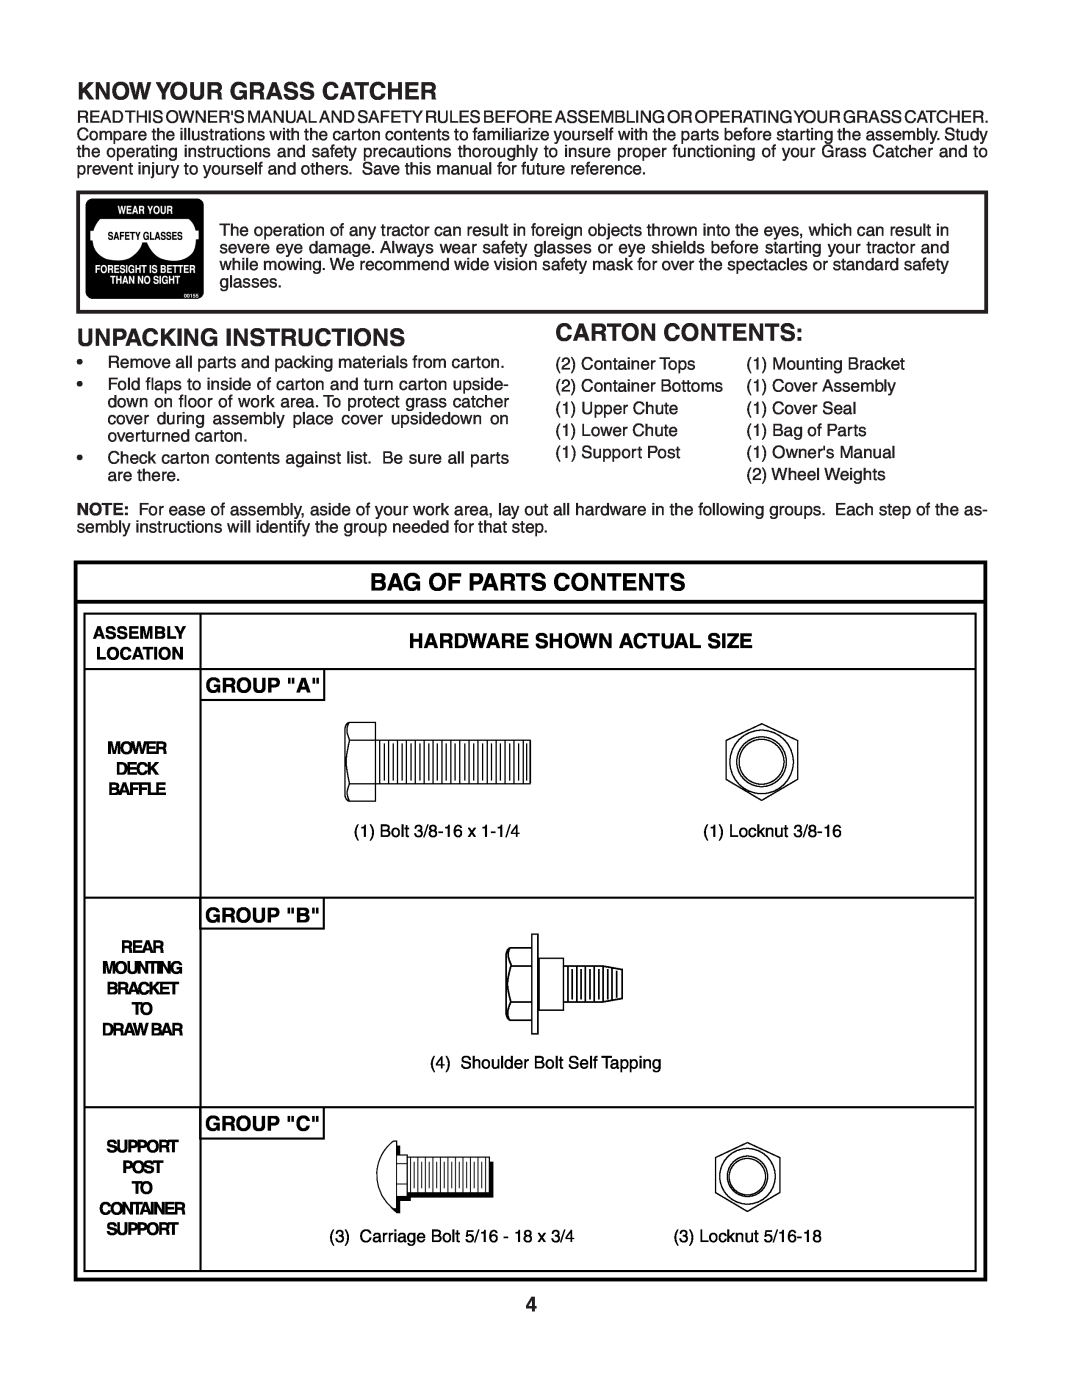 Poulan 532140602 Know Your Grass Catcher, Unpacking Instructions, Carton Contents, Bag Of Parts Contents, Group A, Group B 